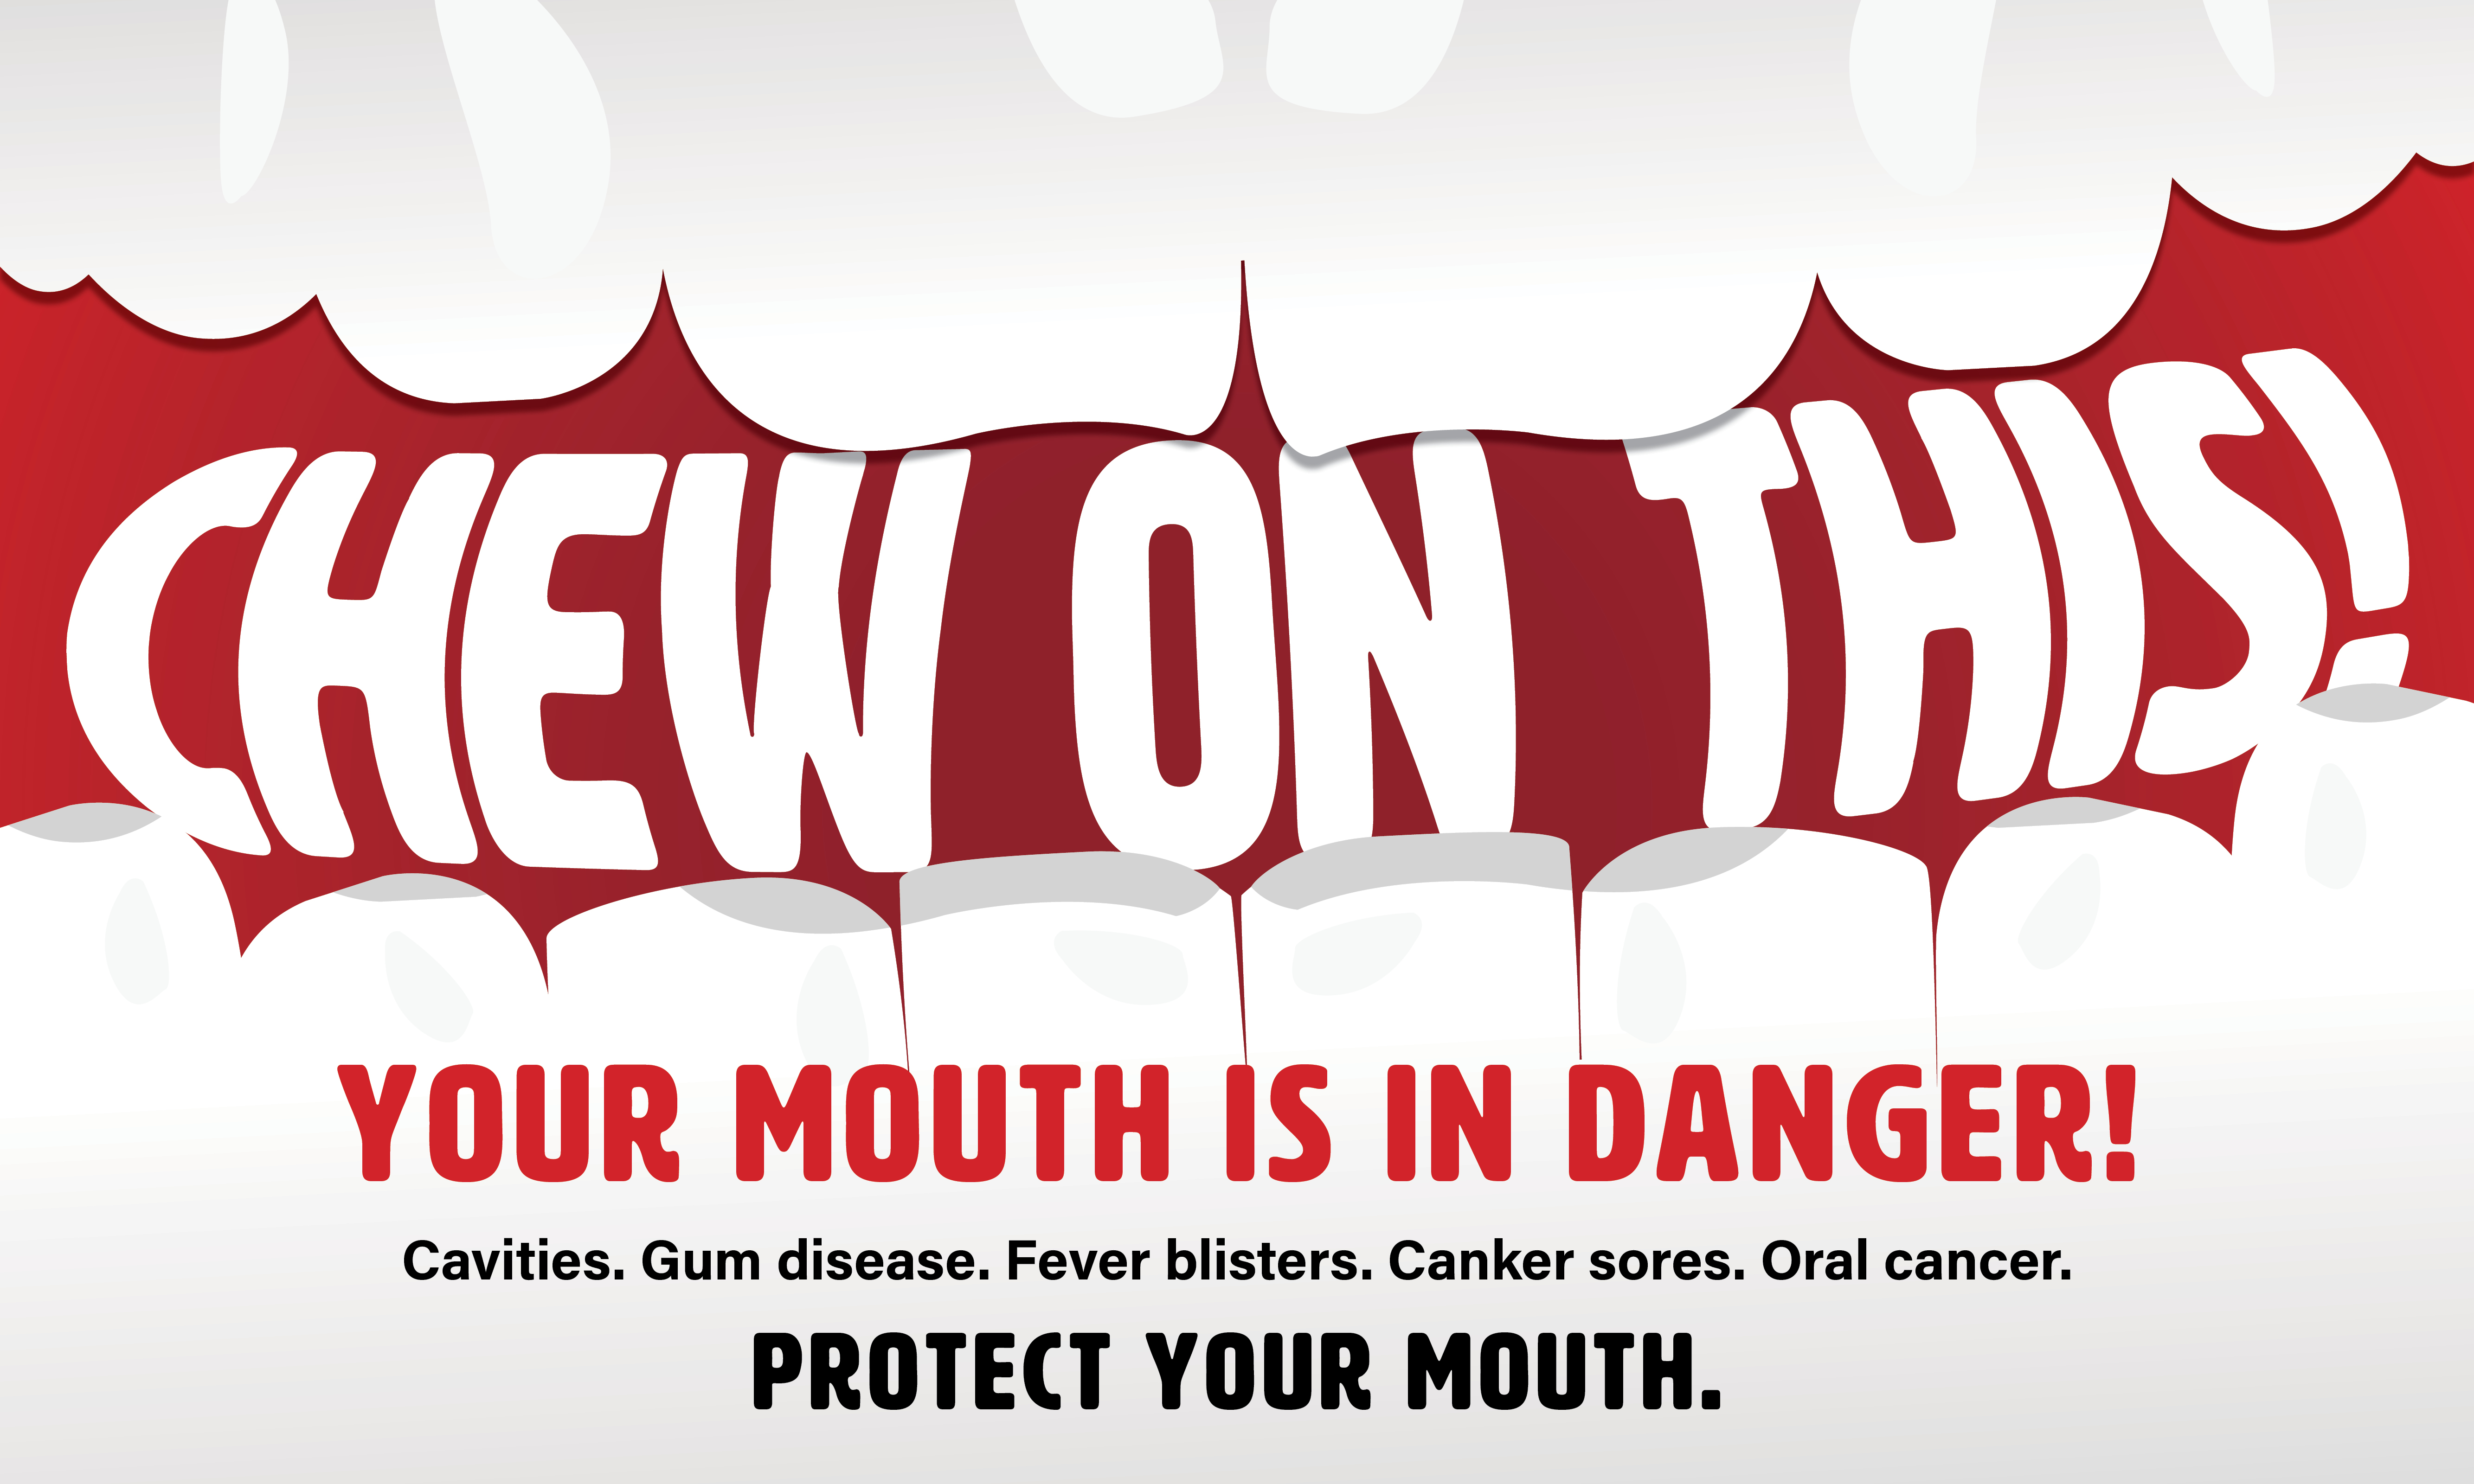 cartoon image of a mouth with the text "chew on this"